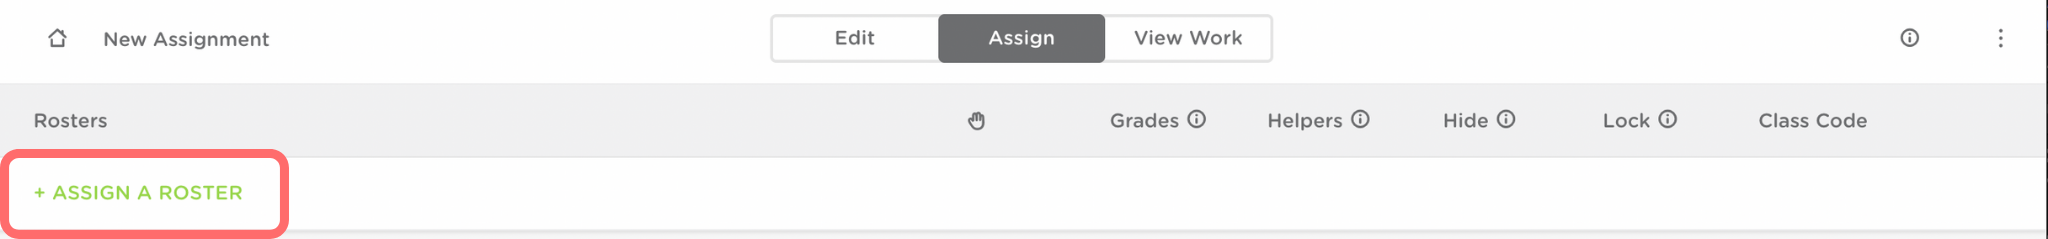 The assign tab under assignments. +Assign a roster is outlined in red on the left hand side.